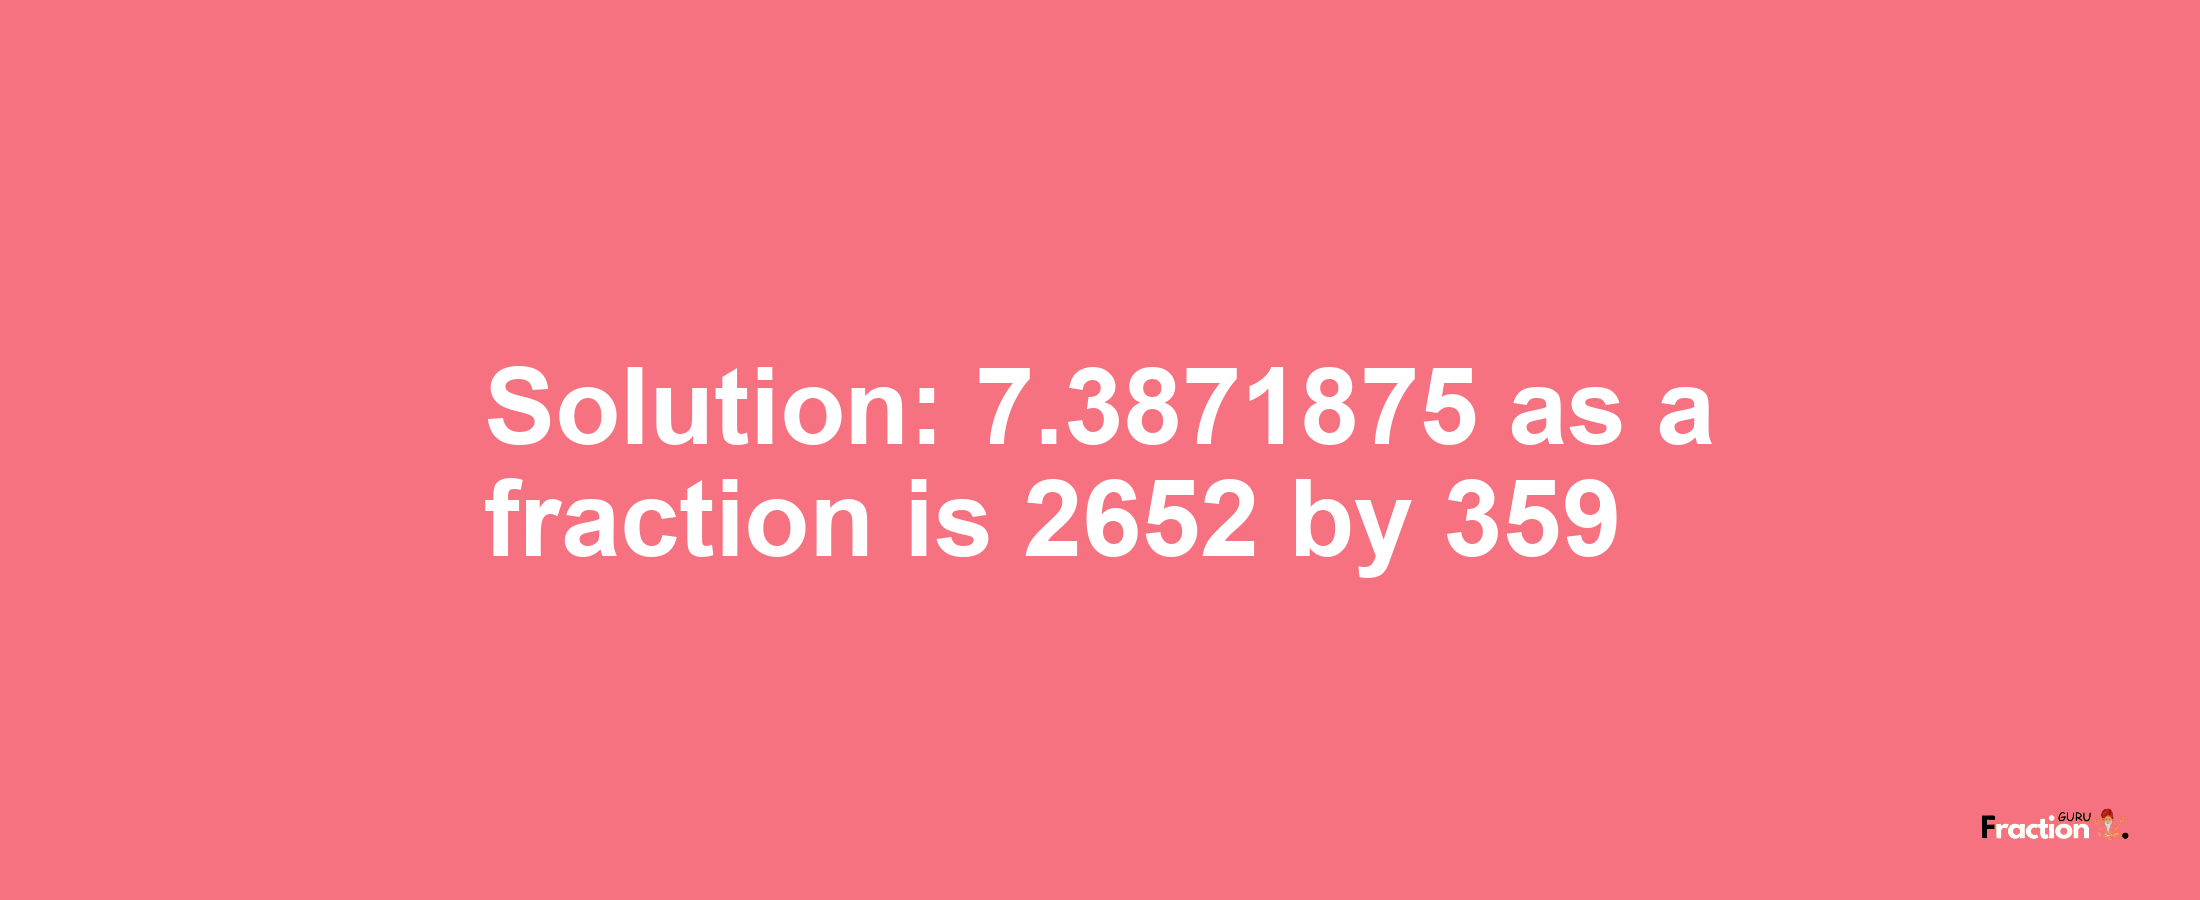 Solution:7.3871875 as a fraction is 2652/359